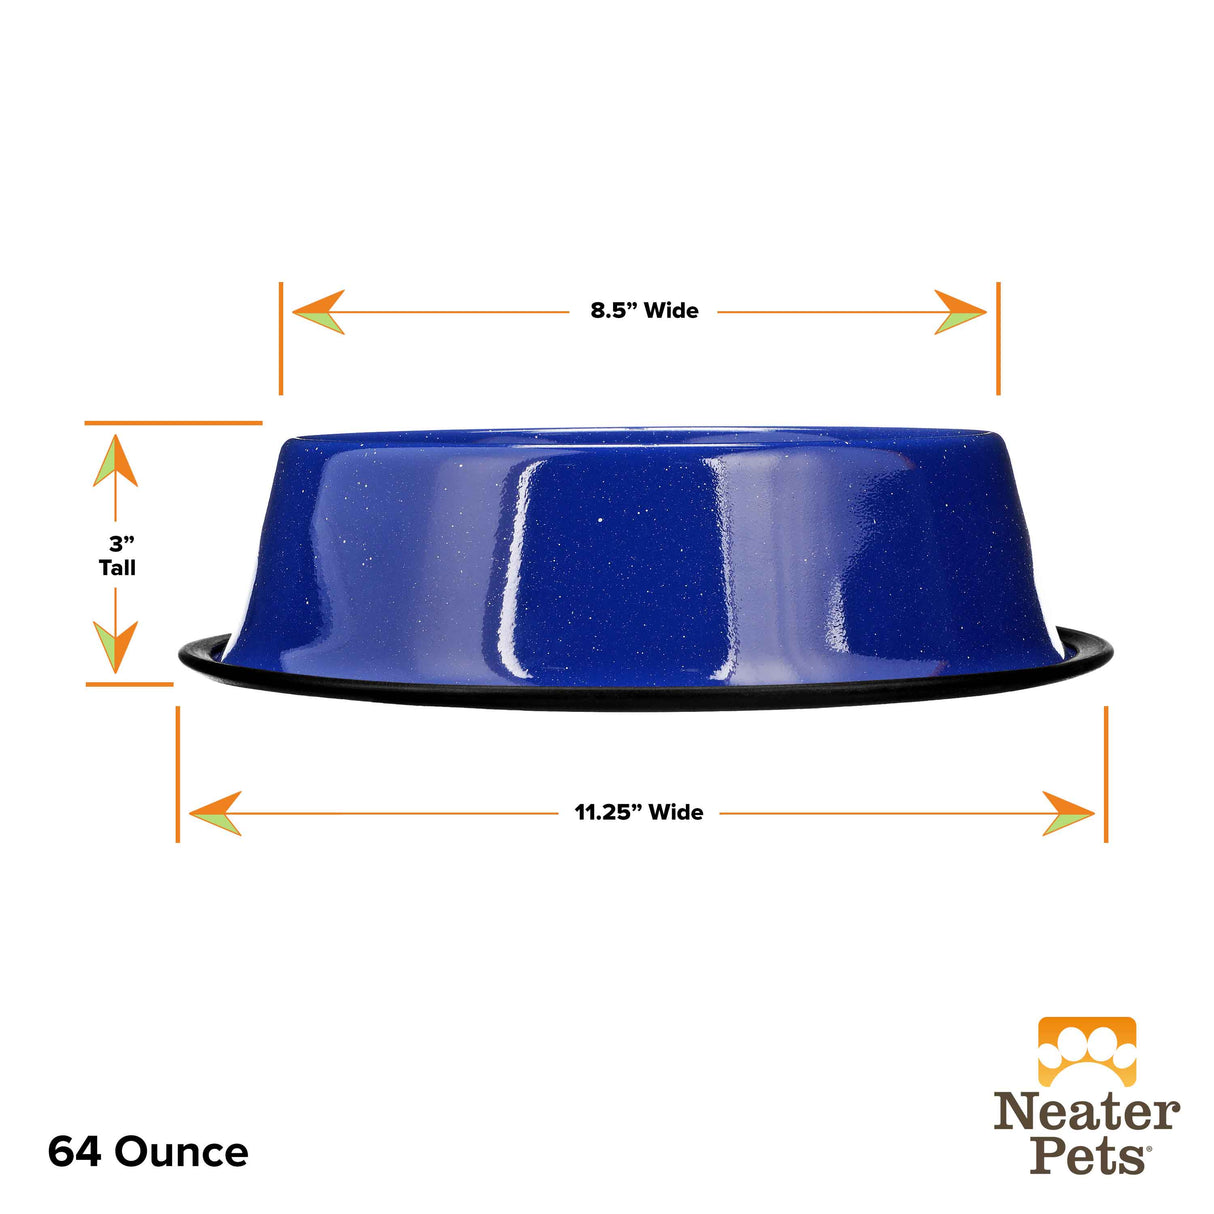 64 ounce Blue Camping Bowl sizing guide.